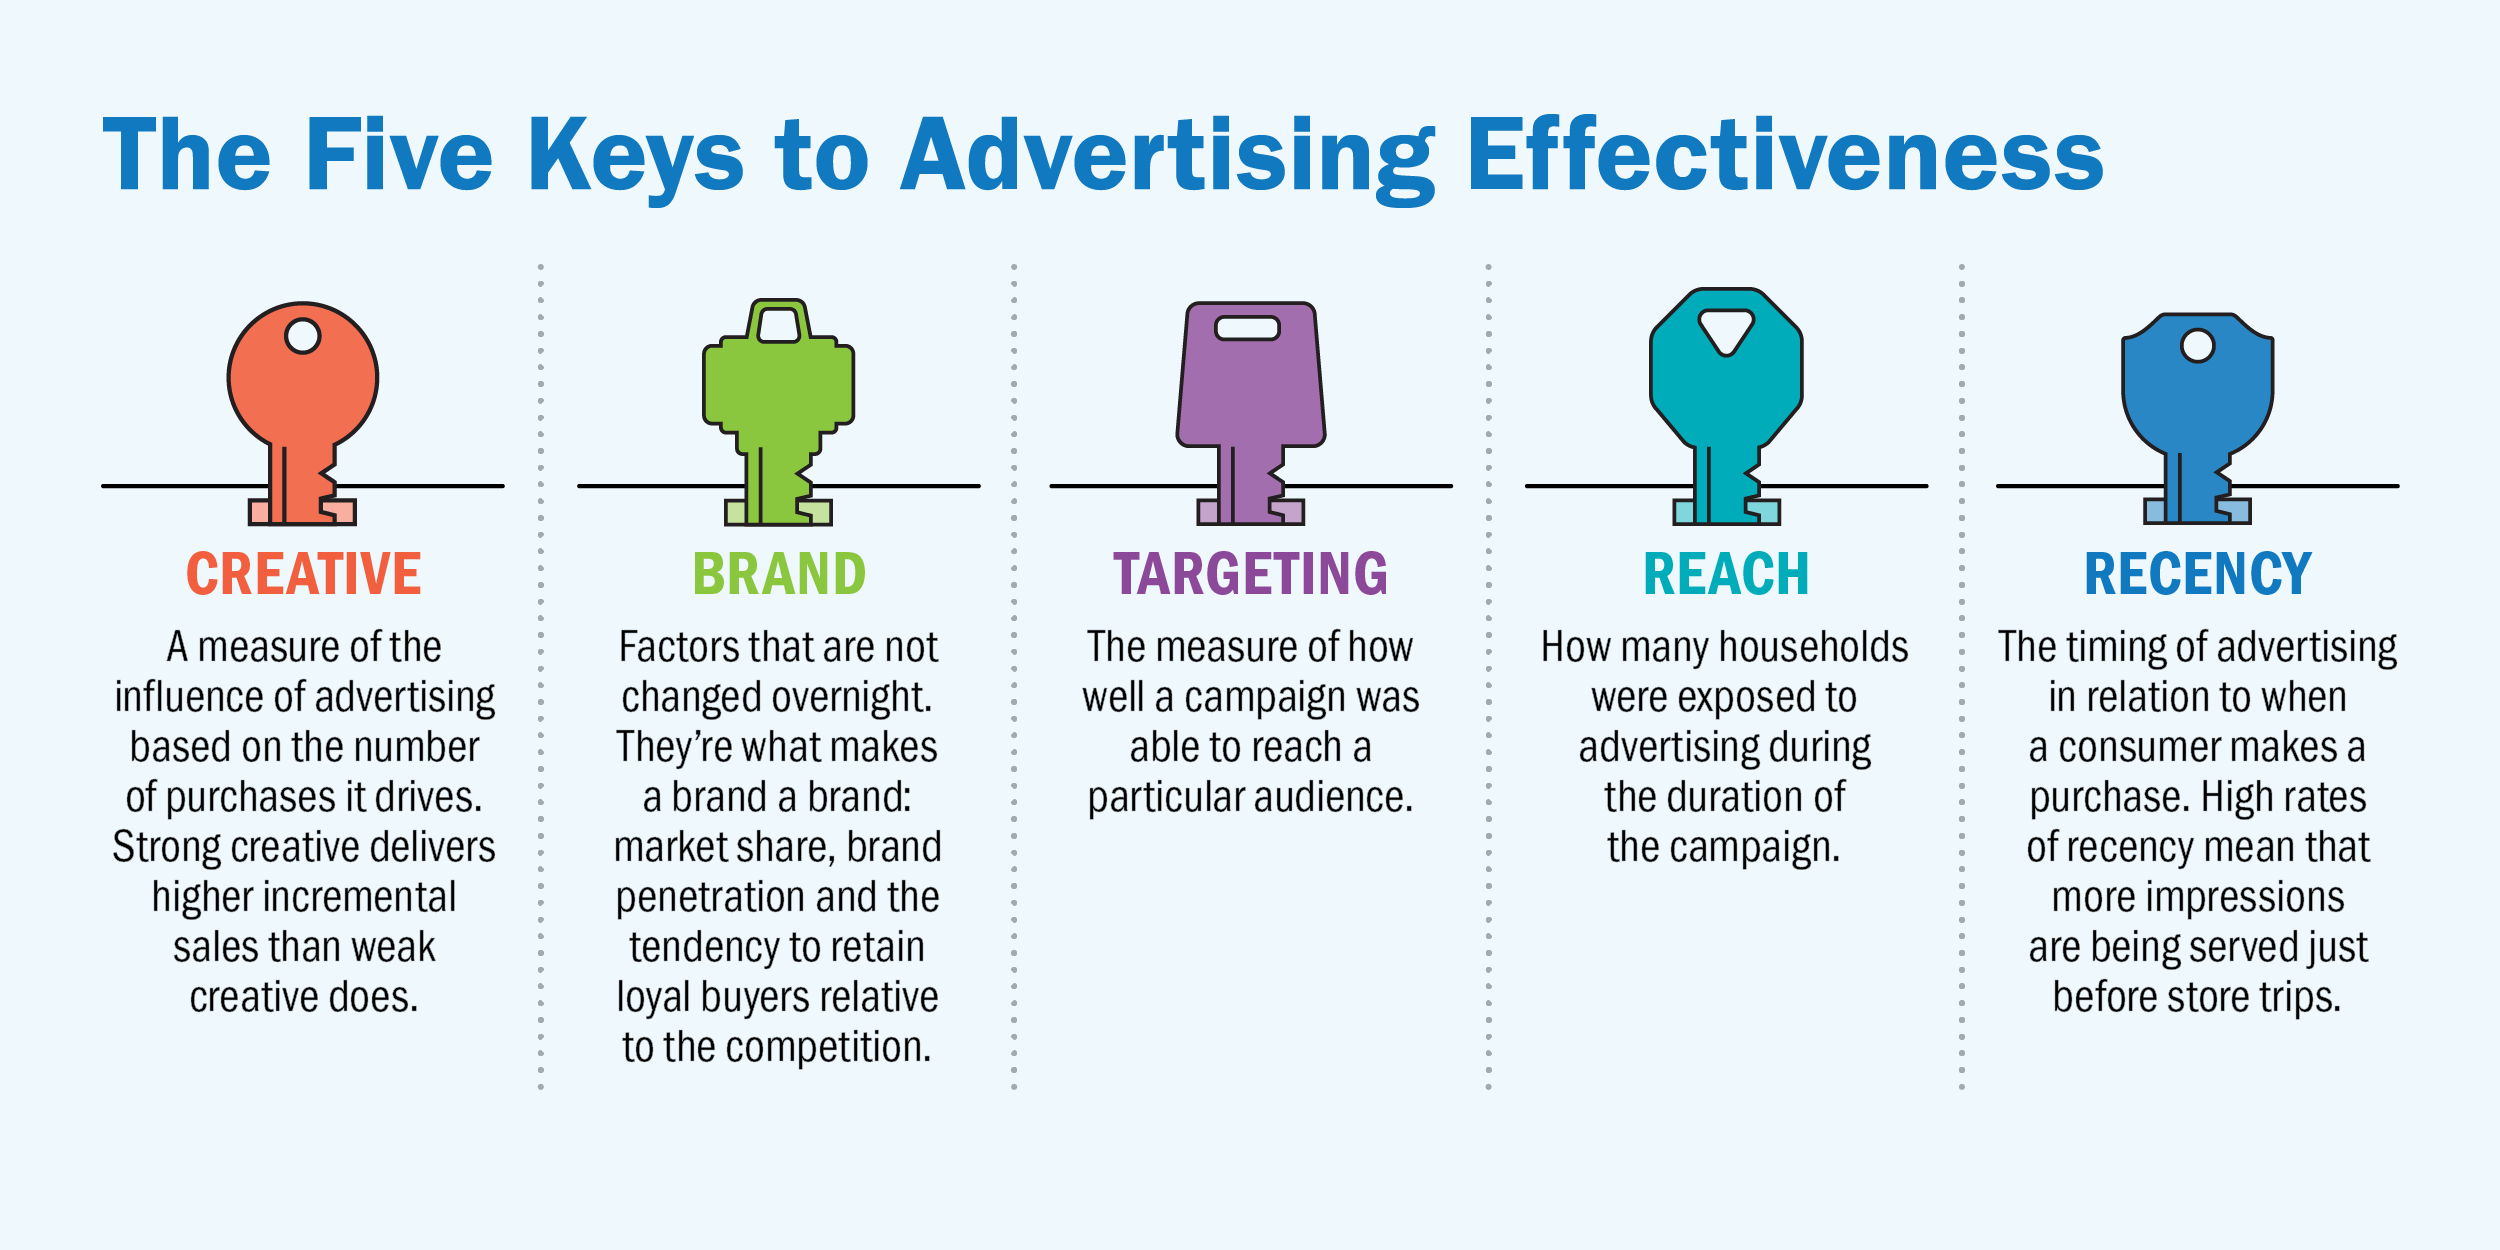 Breakdown of the five keys to advertising effectiveness is creative, brand, targeting, reach, and recency.